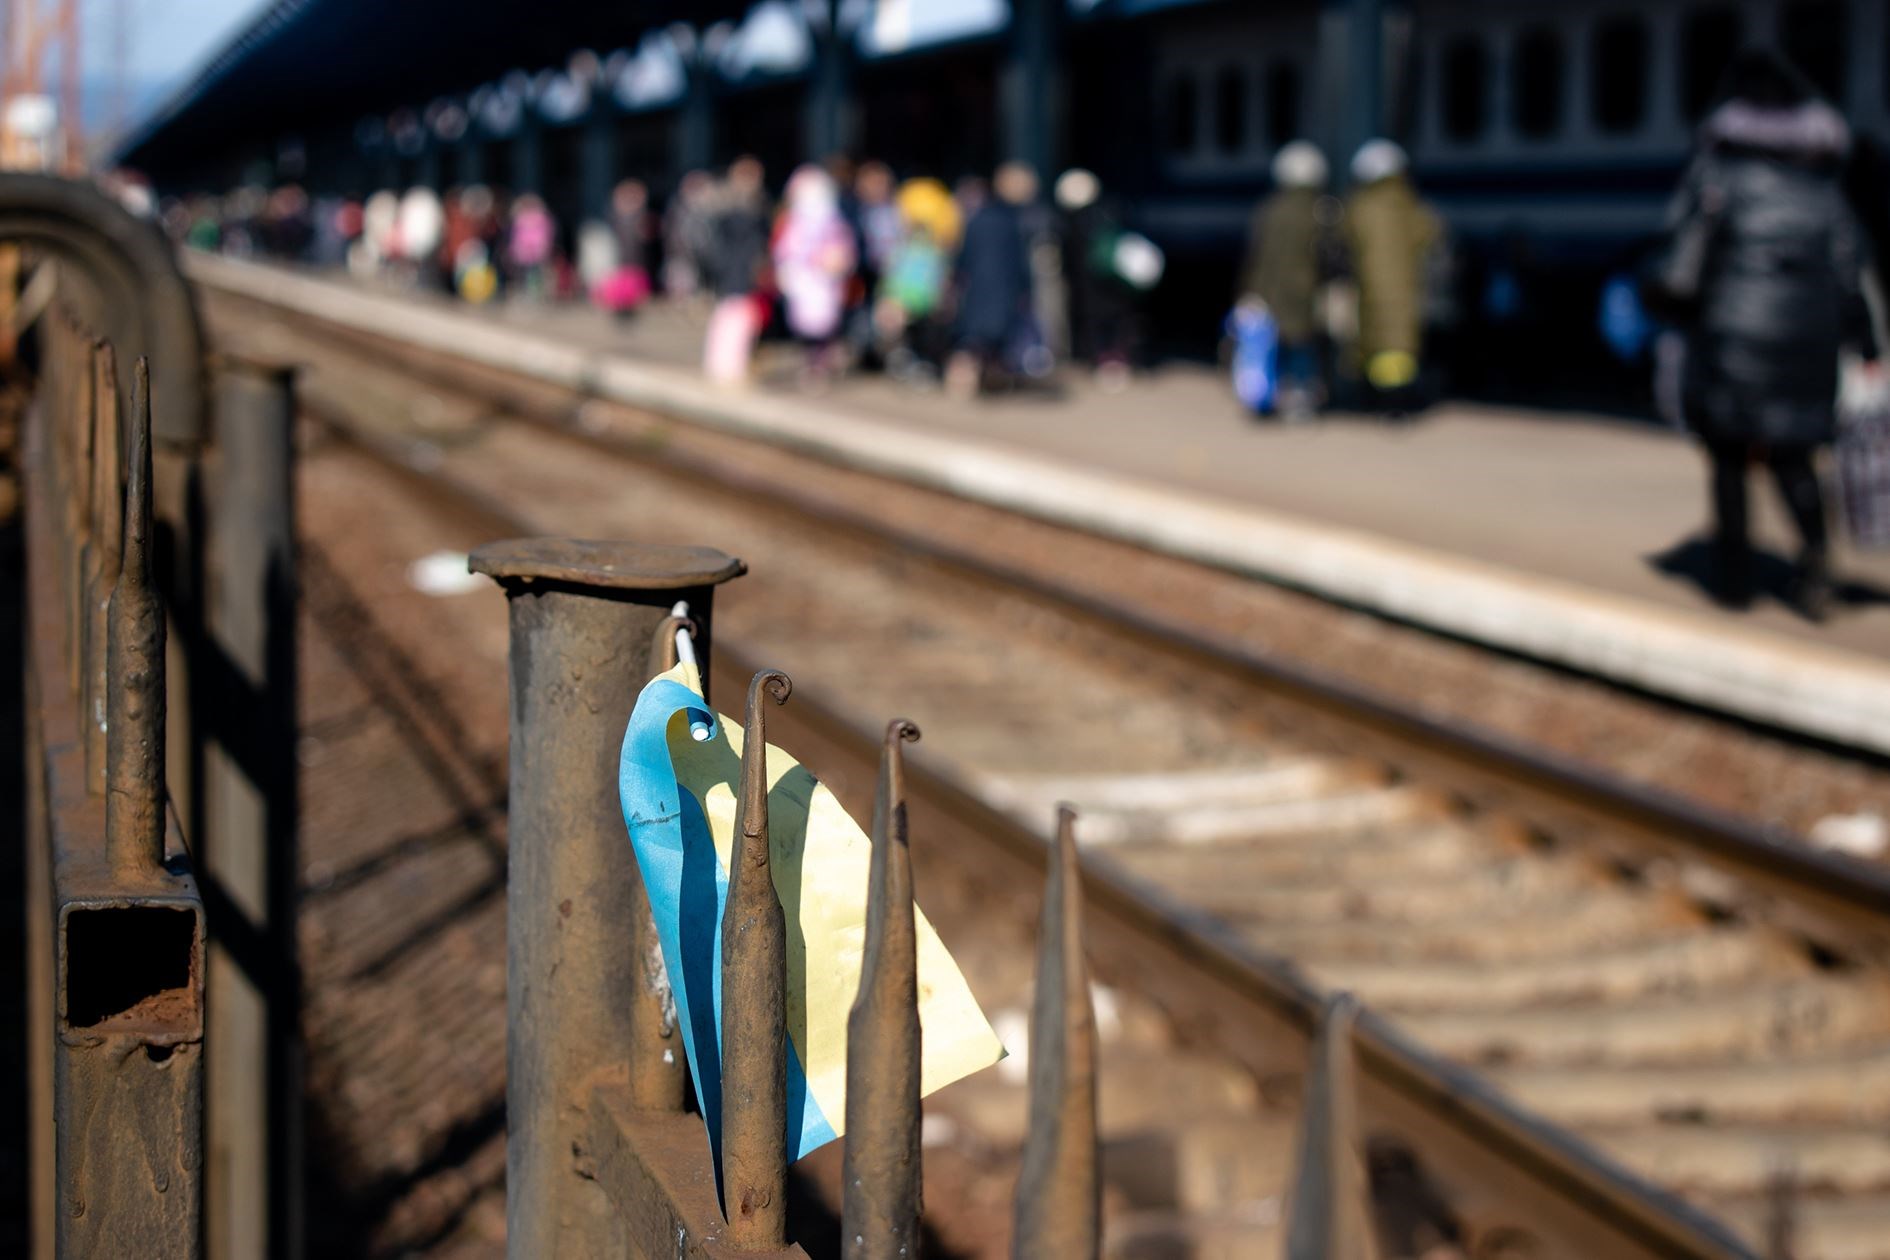 Ukrainian refugees leave Ukraine. Railway stations of Western Ukraine are filled with migrants. Ukrainian Flag on a fence of the station. Humanitarian catastrophe. Refugees got off a train in Uzhhorod